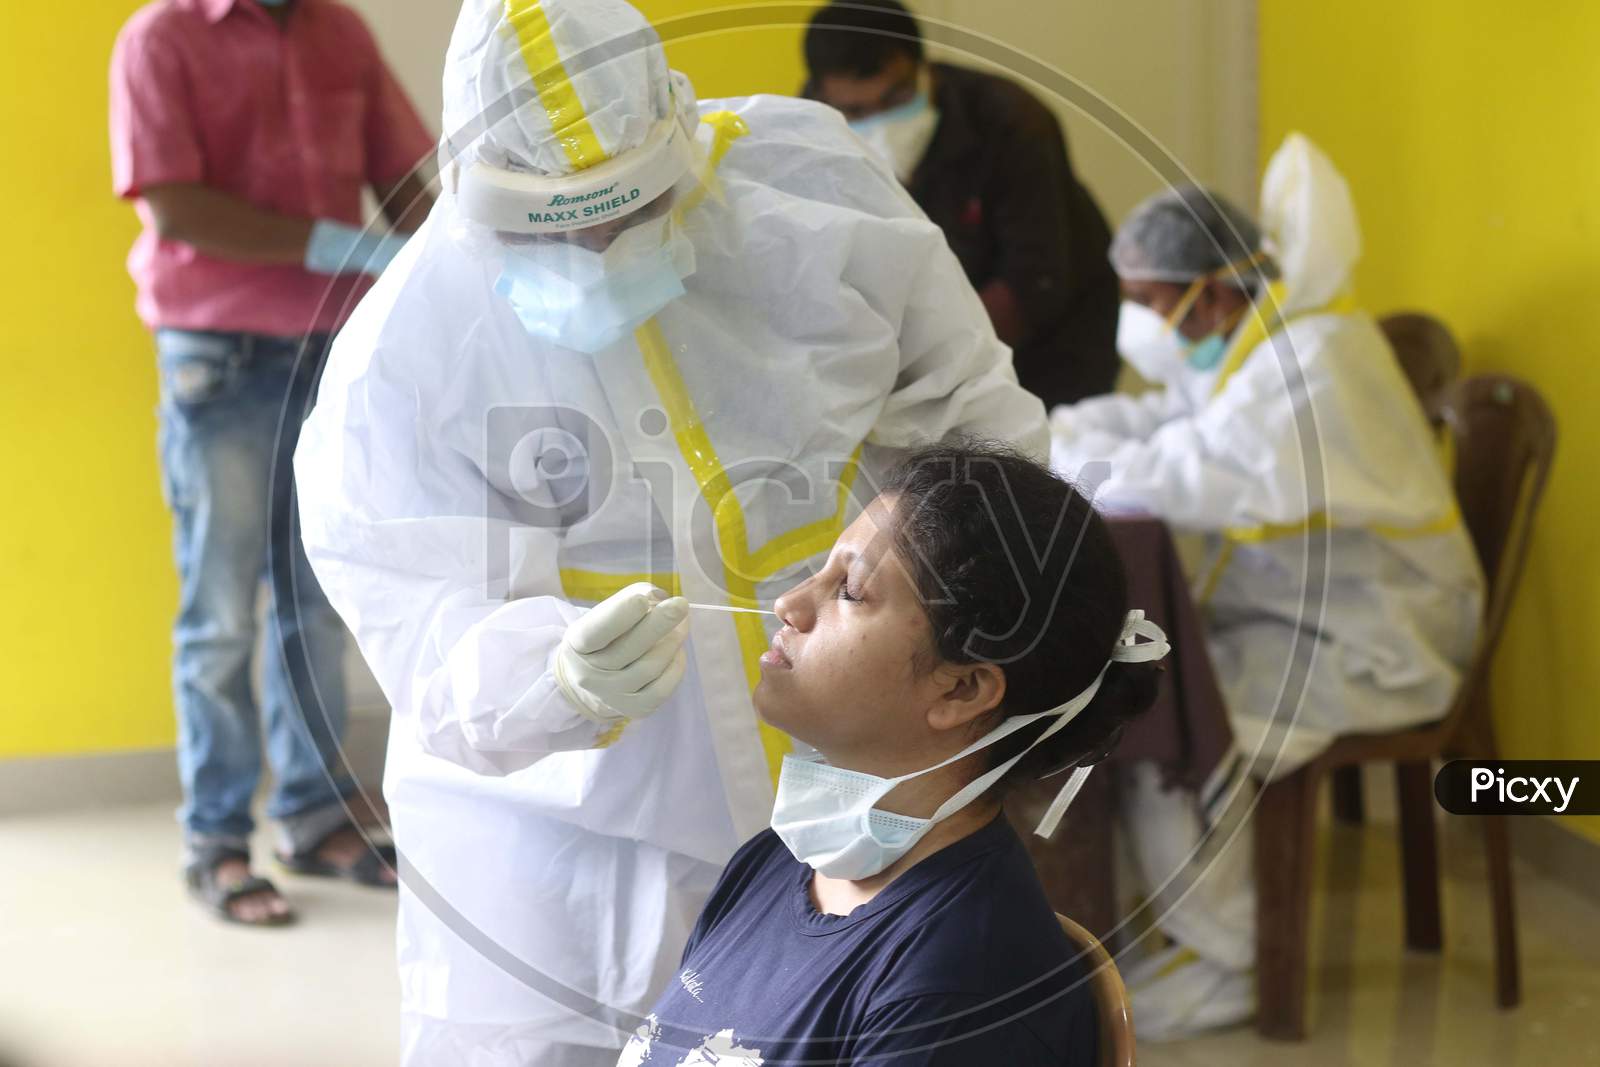 A healthcare worker collects samples from a person for Covid -19 antigen testing amid the complete bi-weekly lockdown to curb Coronavirus spread in Kolkata on August 8, 2020